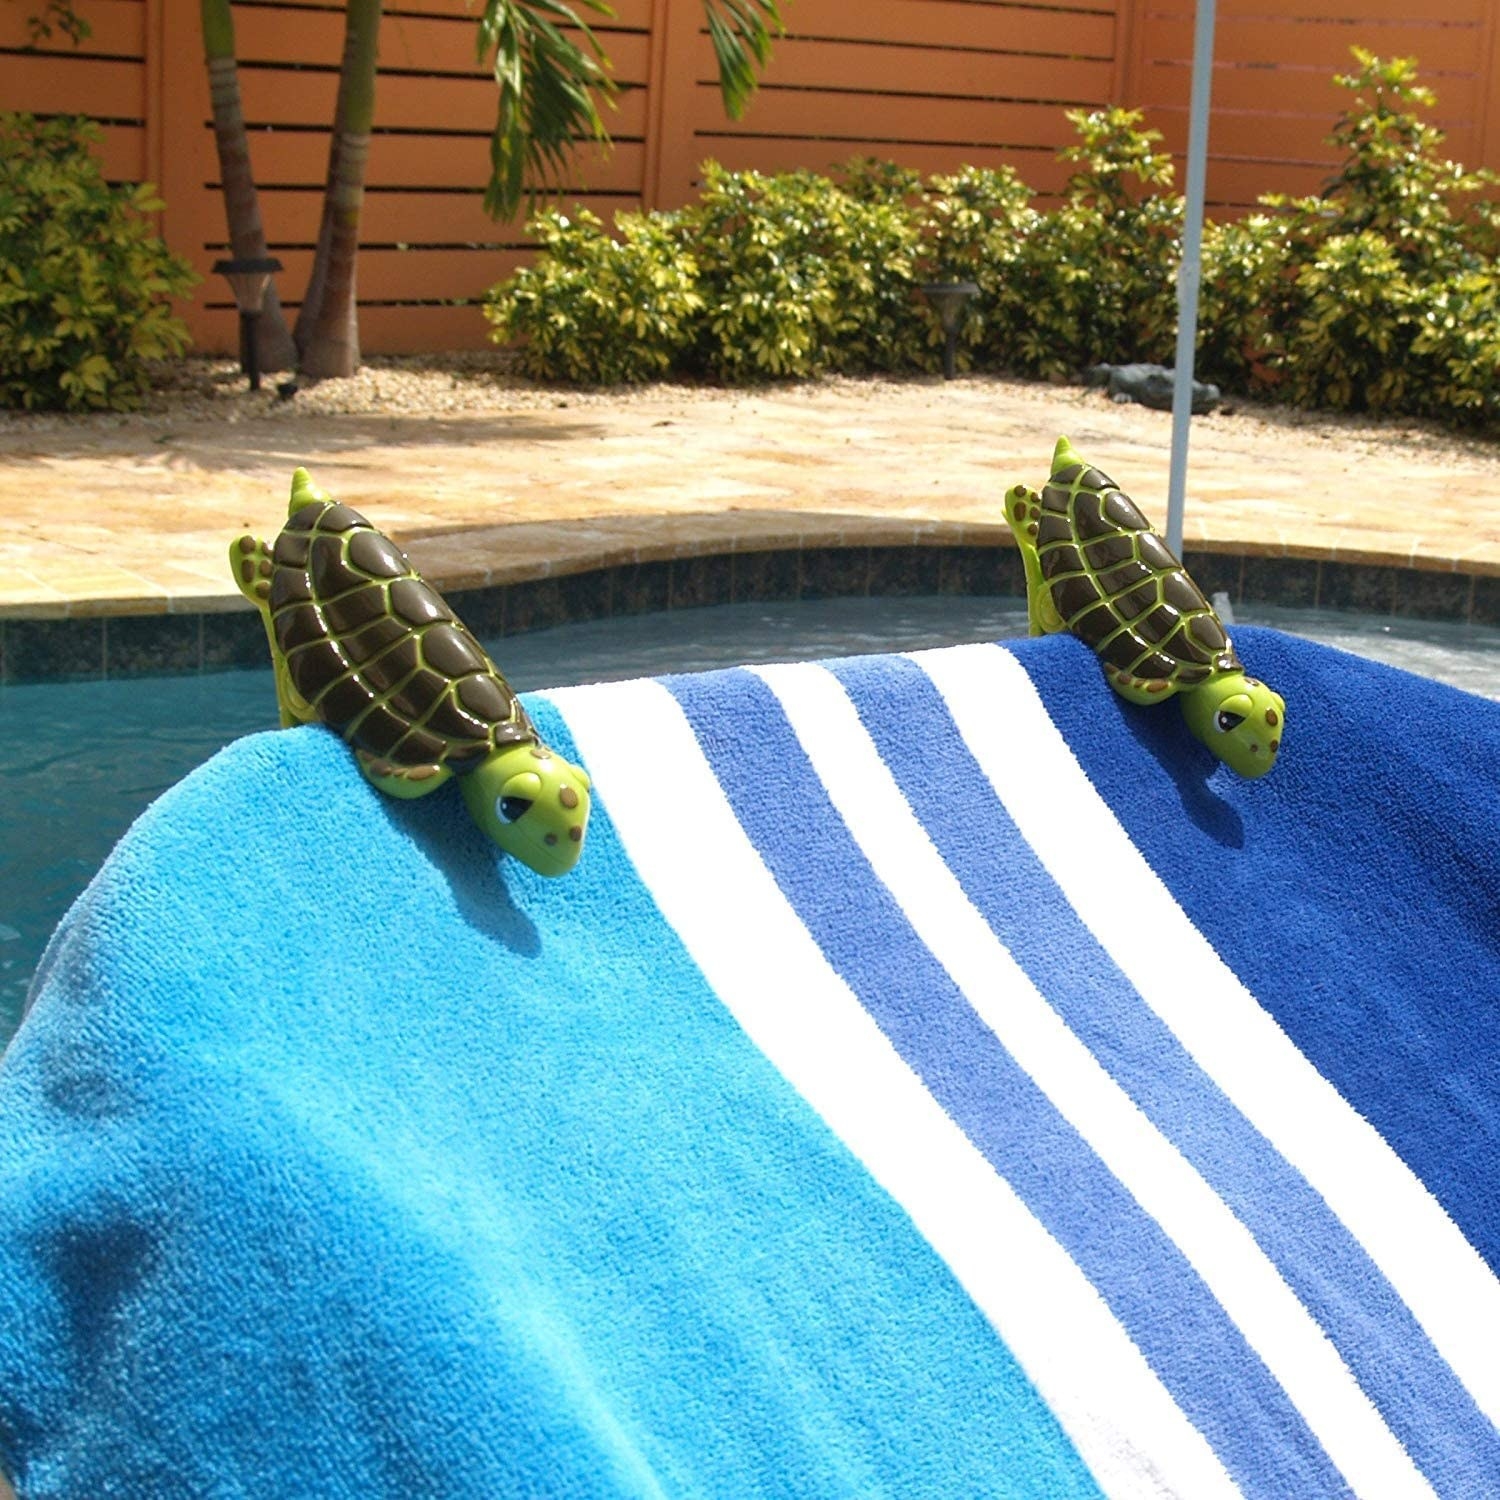 Two turtle clips being used to clip a towel onto a chair